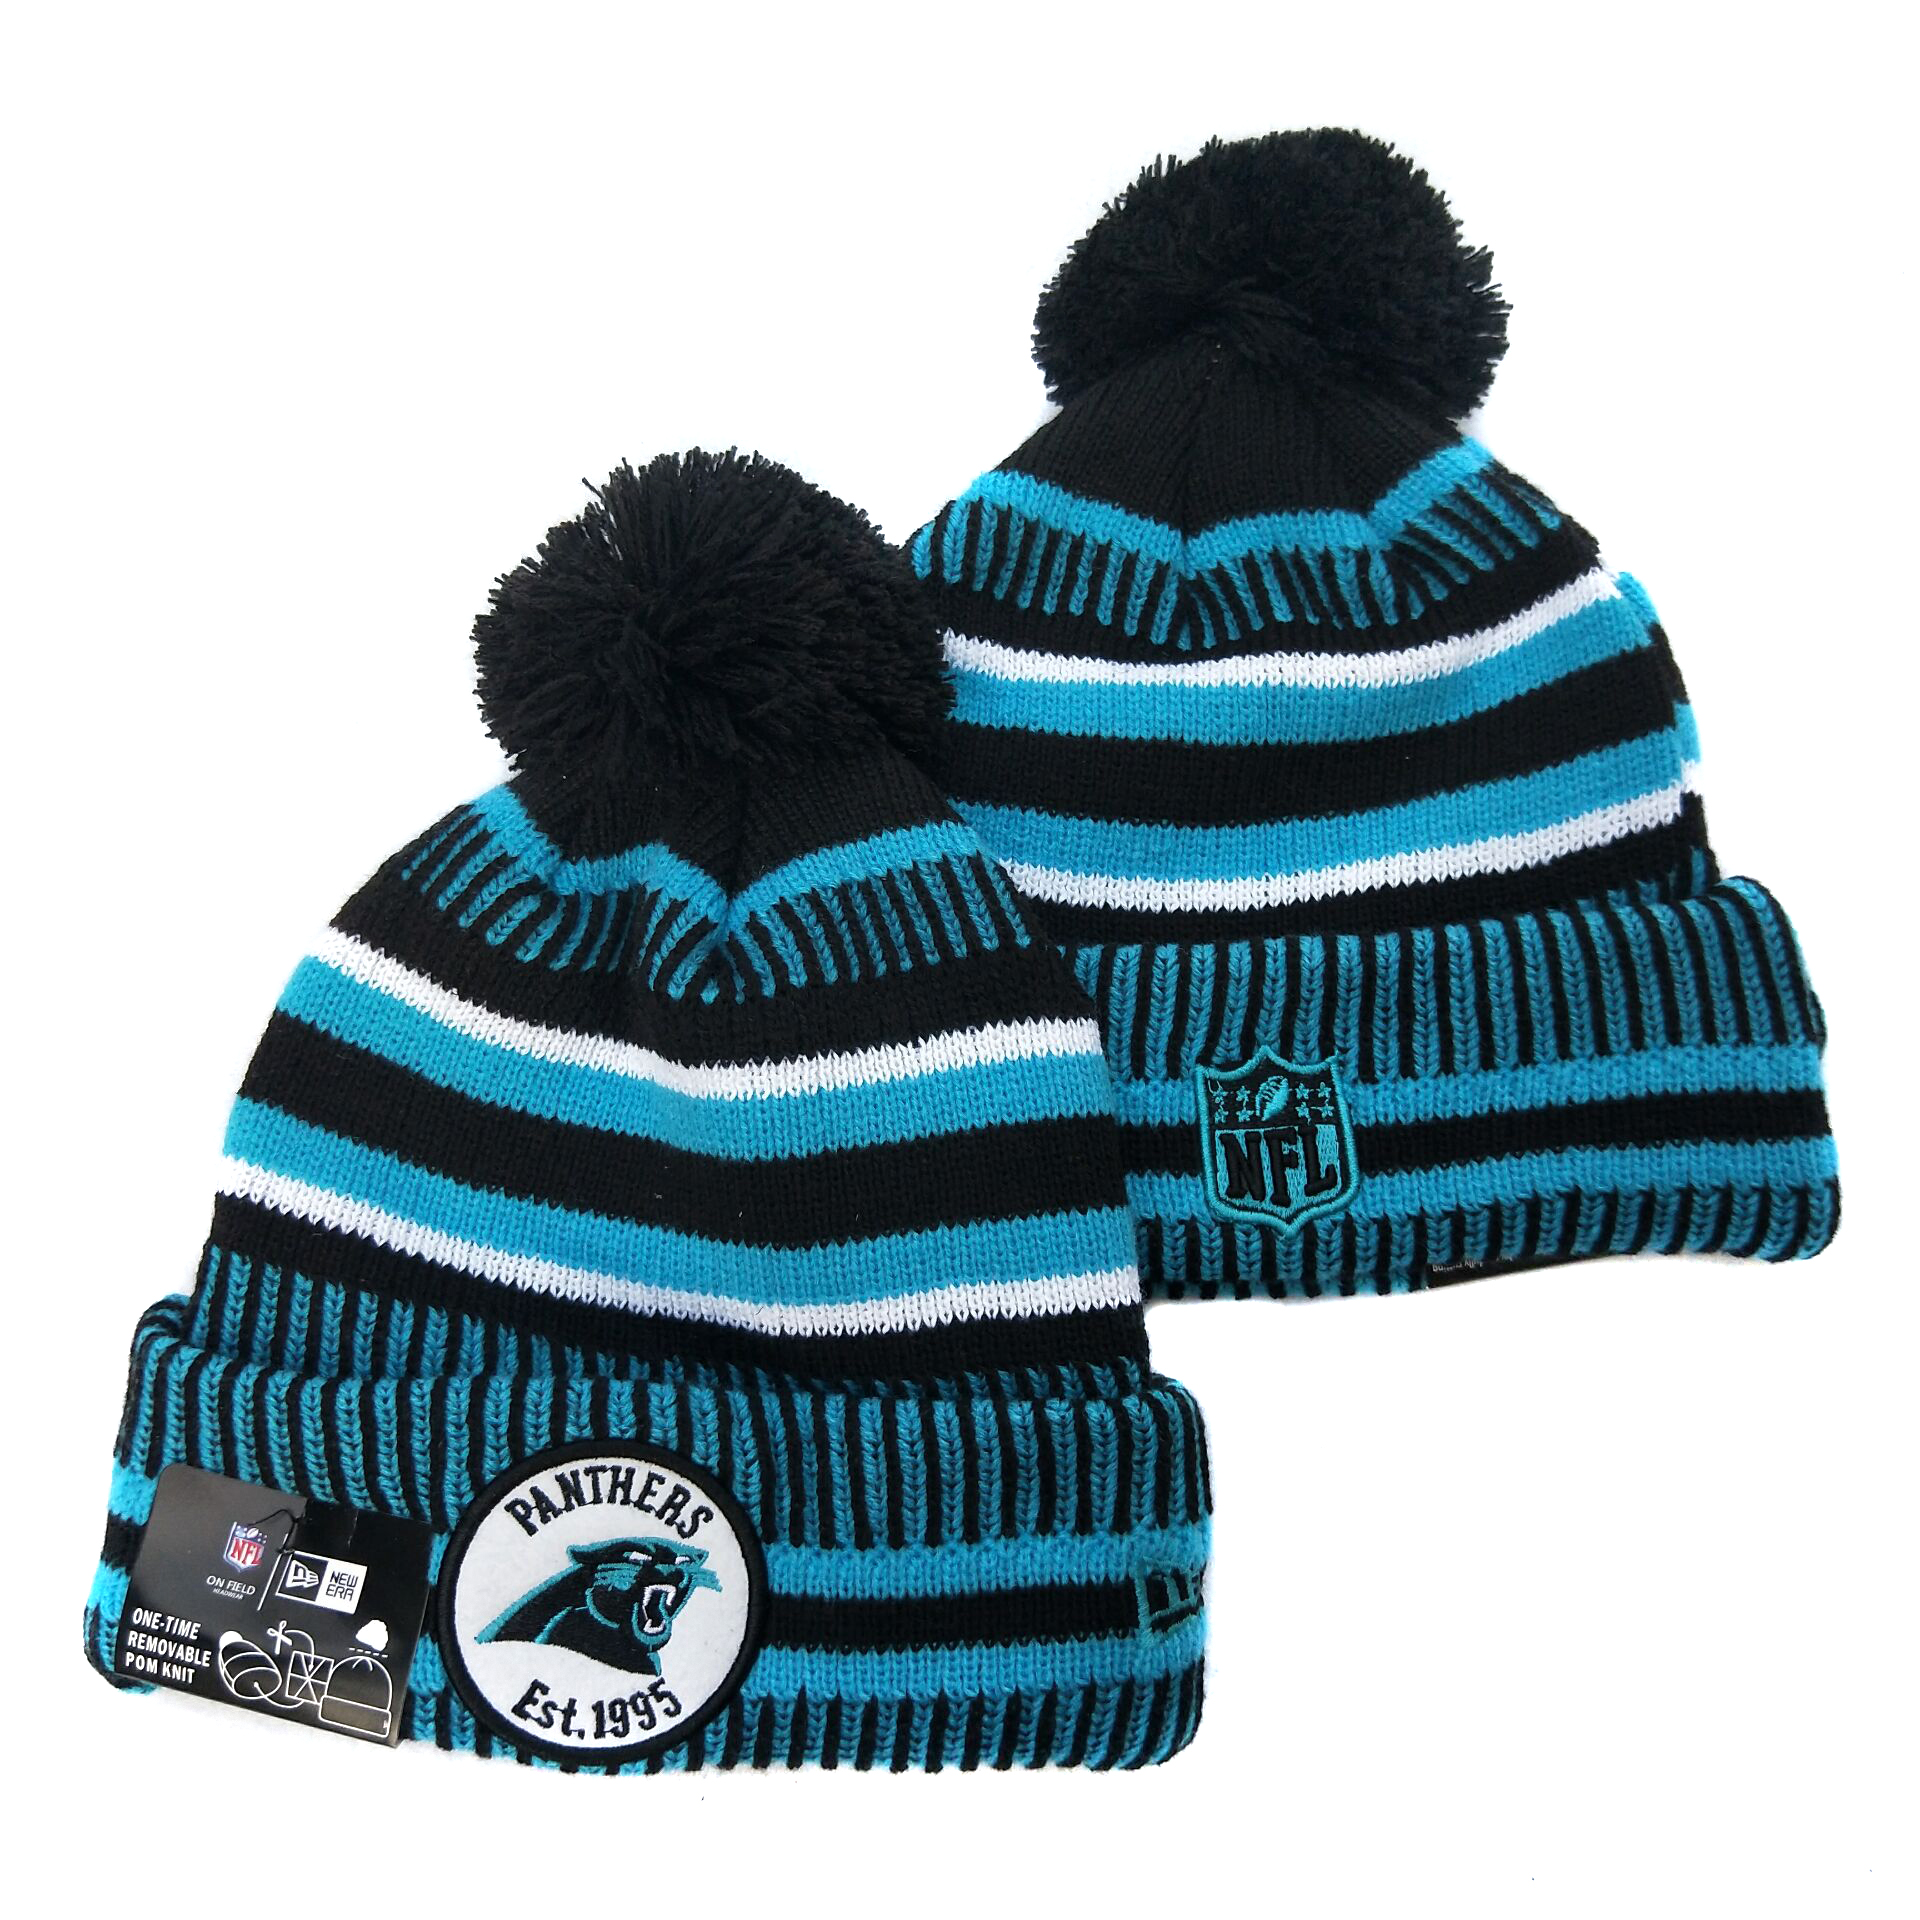 Panthers Team Logo Blue Pom Knit Hat YD - Click Image to Close